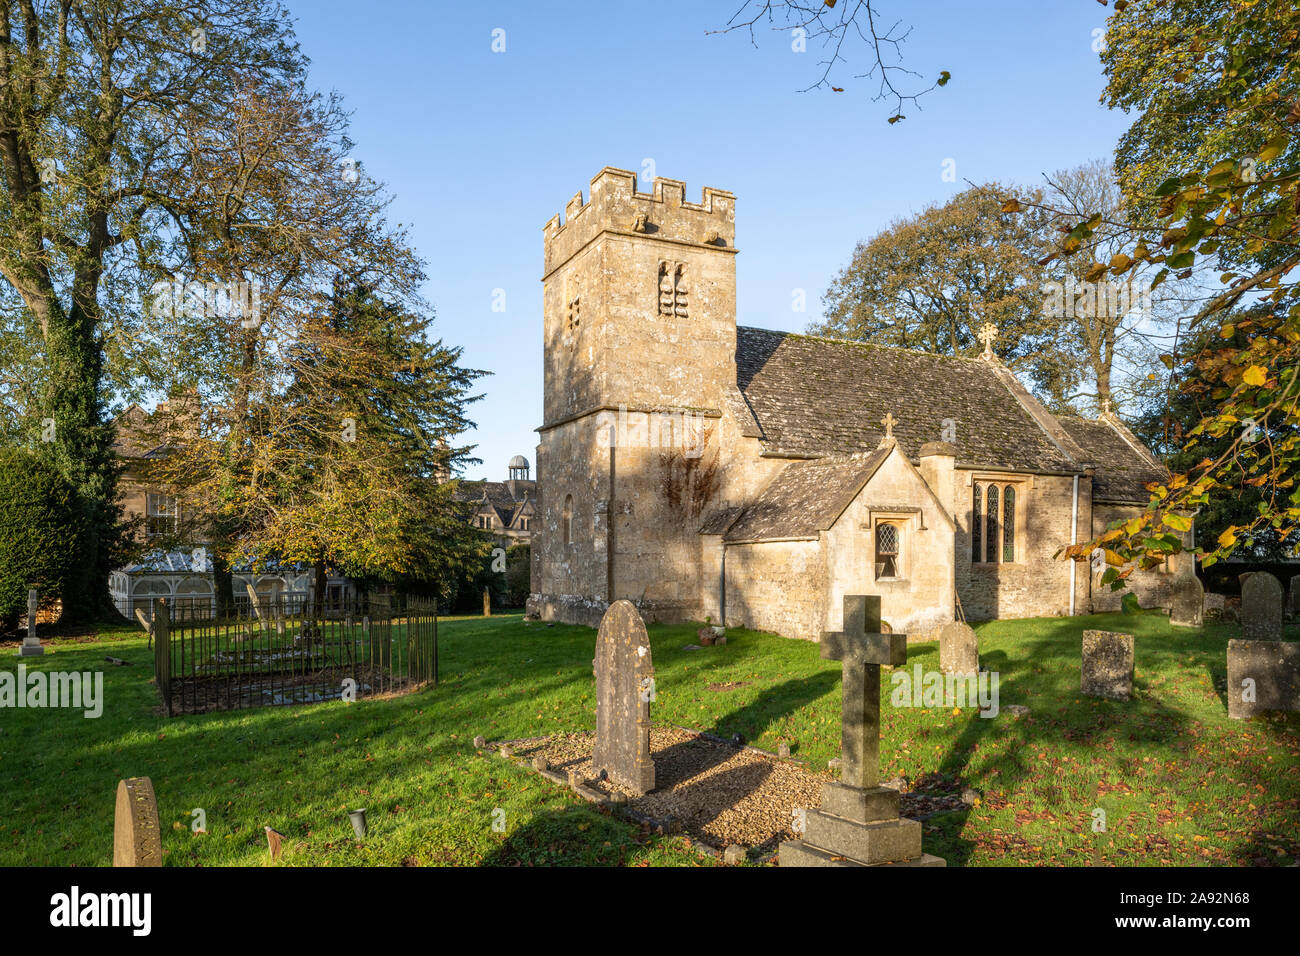 Small Norman All Saints church beside the Jacobean manor house in the grounds of Salperton Park in the Cotswold village of Salperton, Gloucestershire. Stock Photo